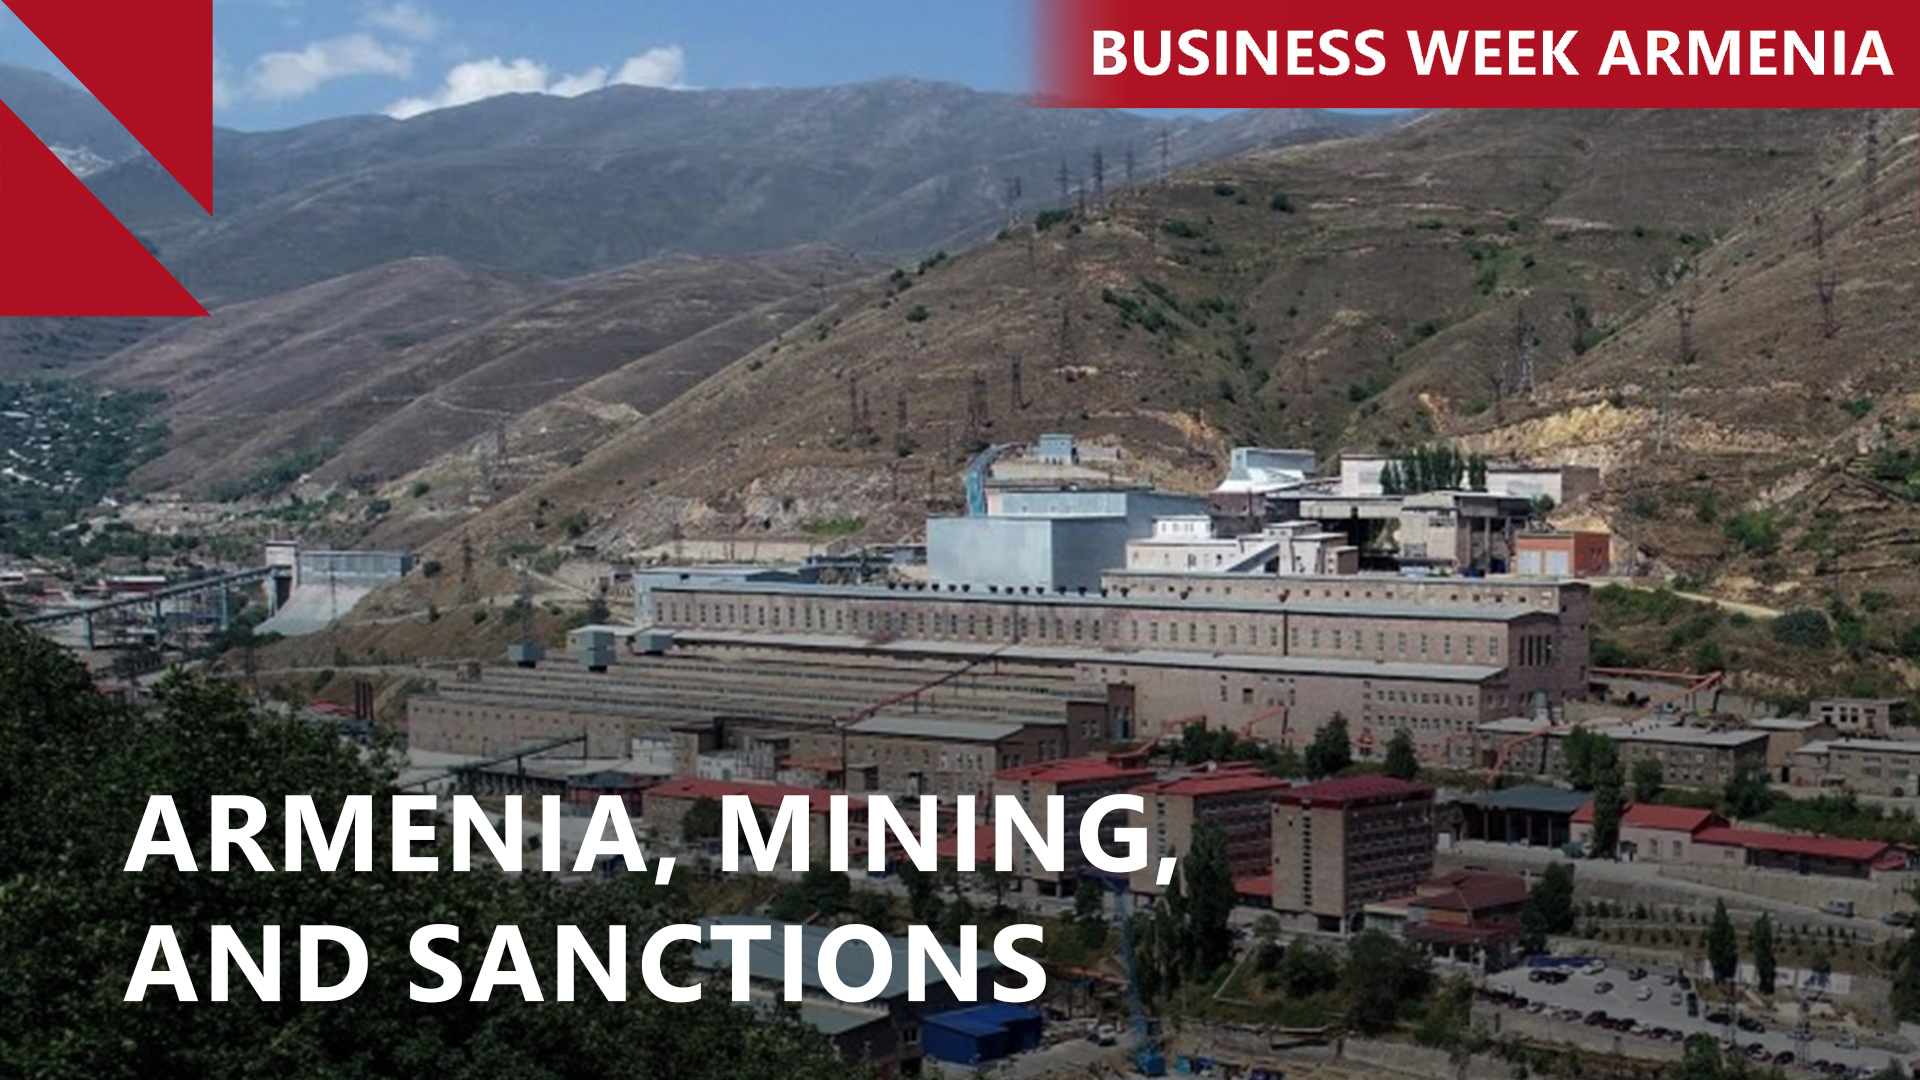 Armenia’s biggest mine says it cut ties with Russian oligarch: THIS WEEK IN BUSINESS